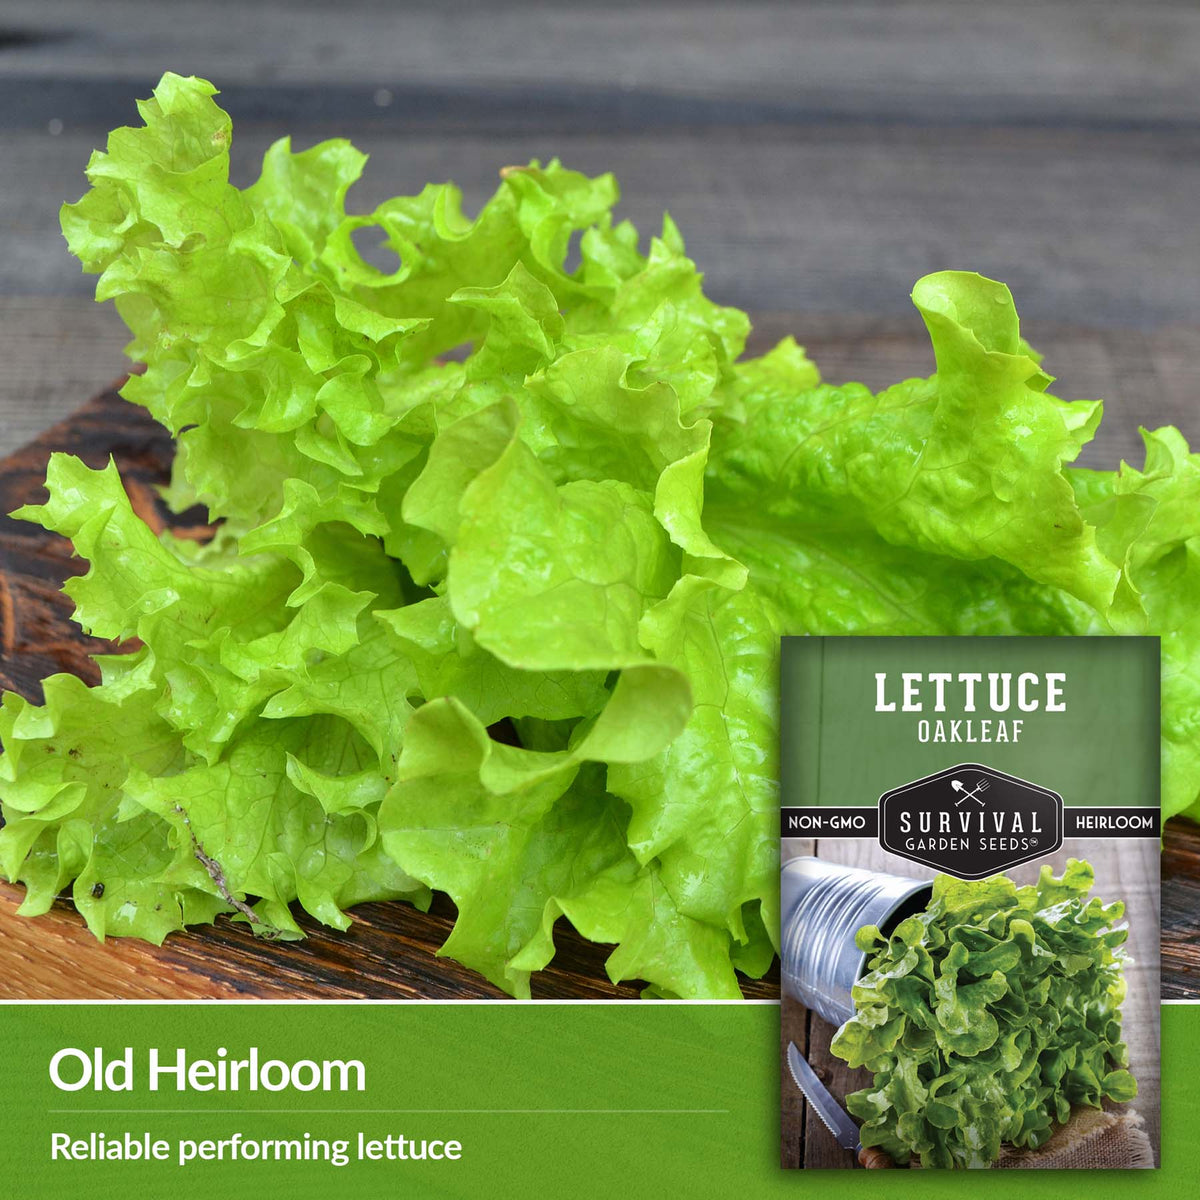 Oakleaf Lettuce is a reliably performing heirloom lettuce